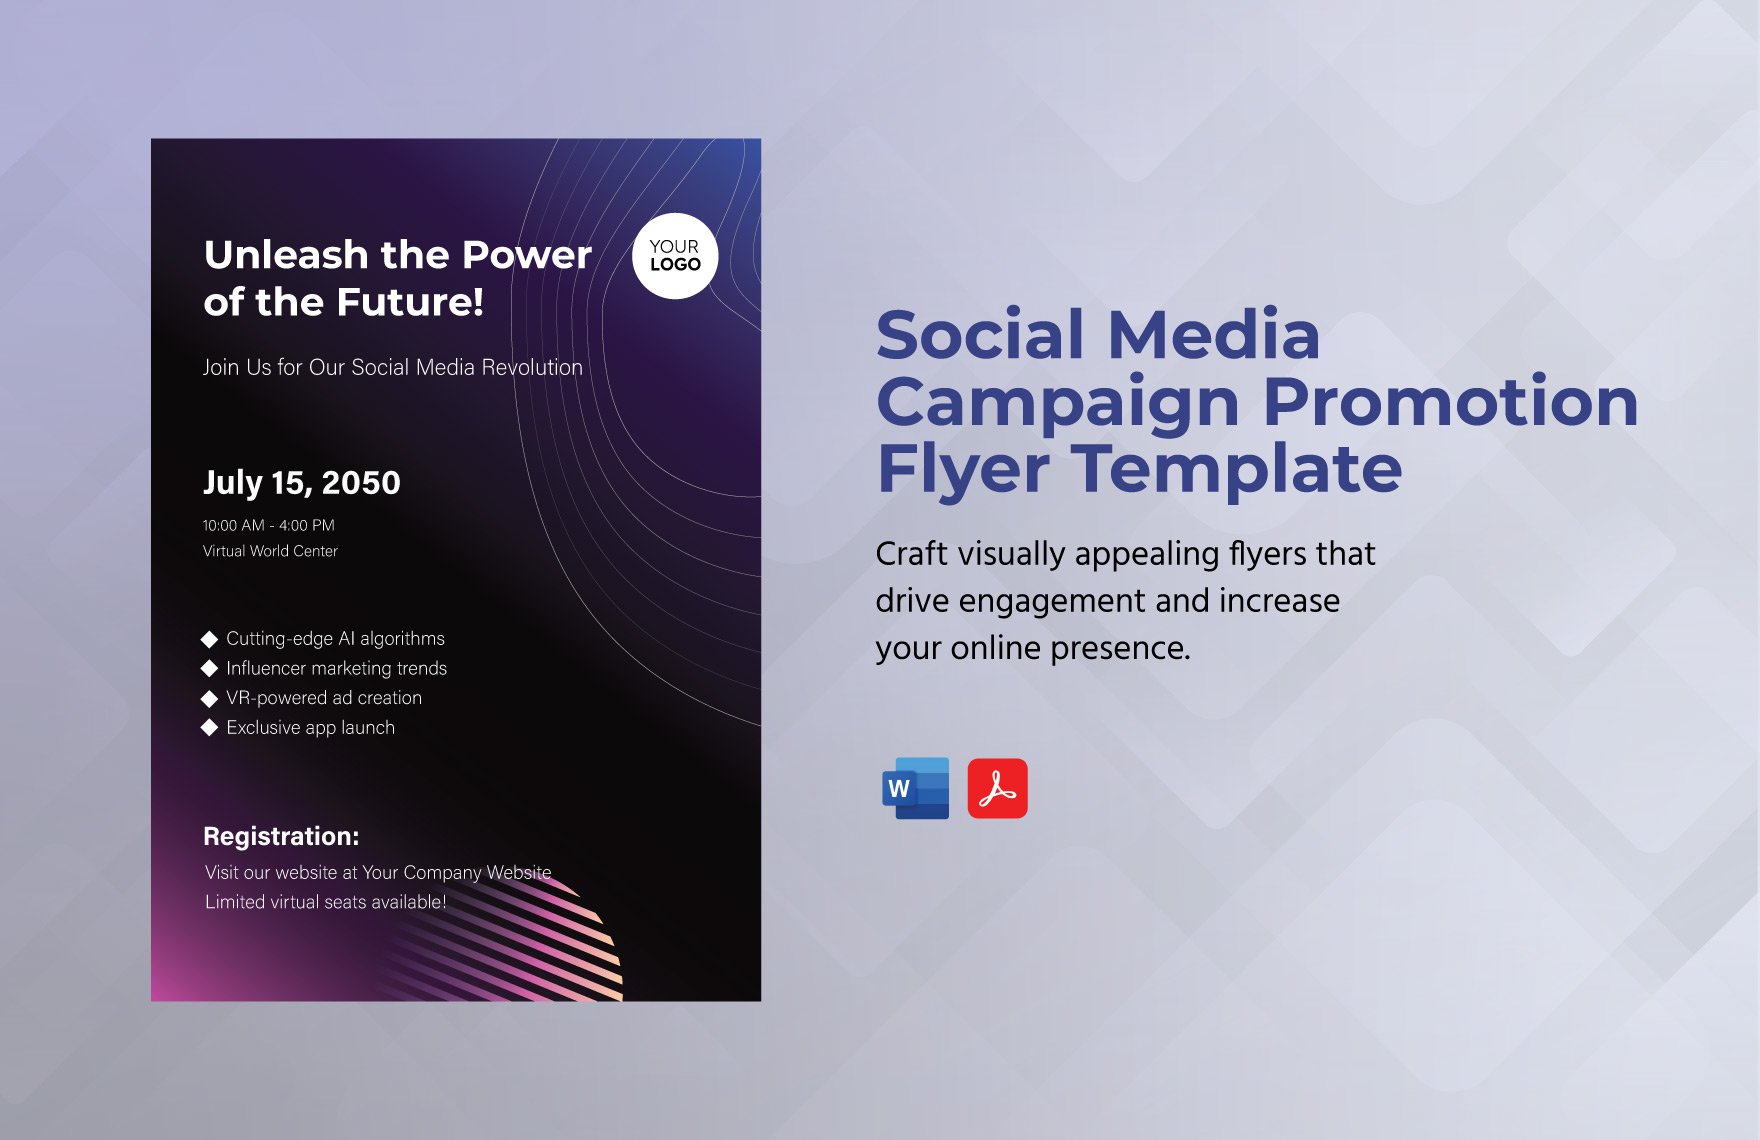 Social Media Campaign Promotion Flyer Template